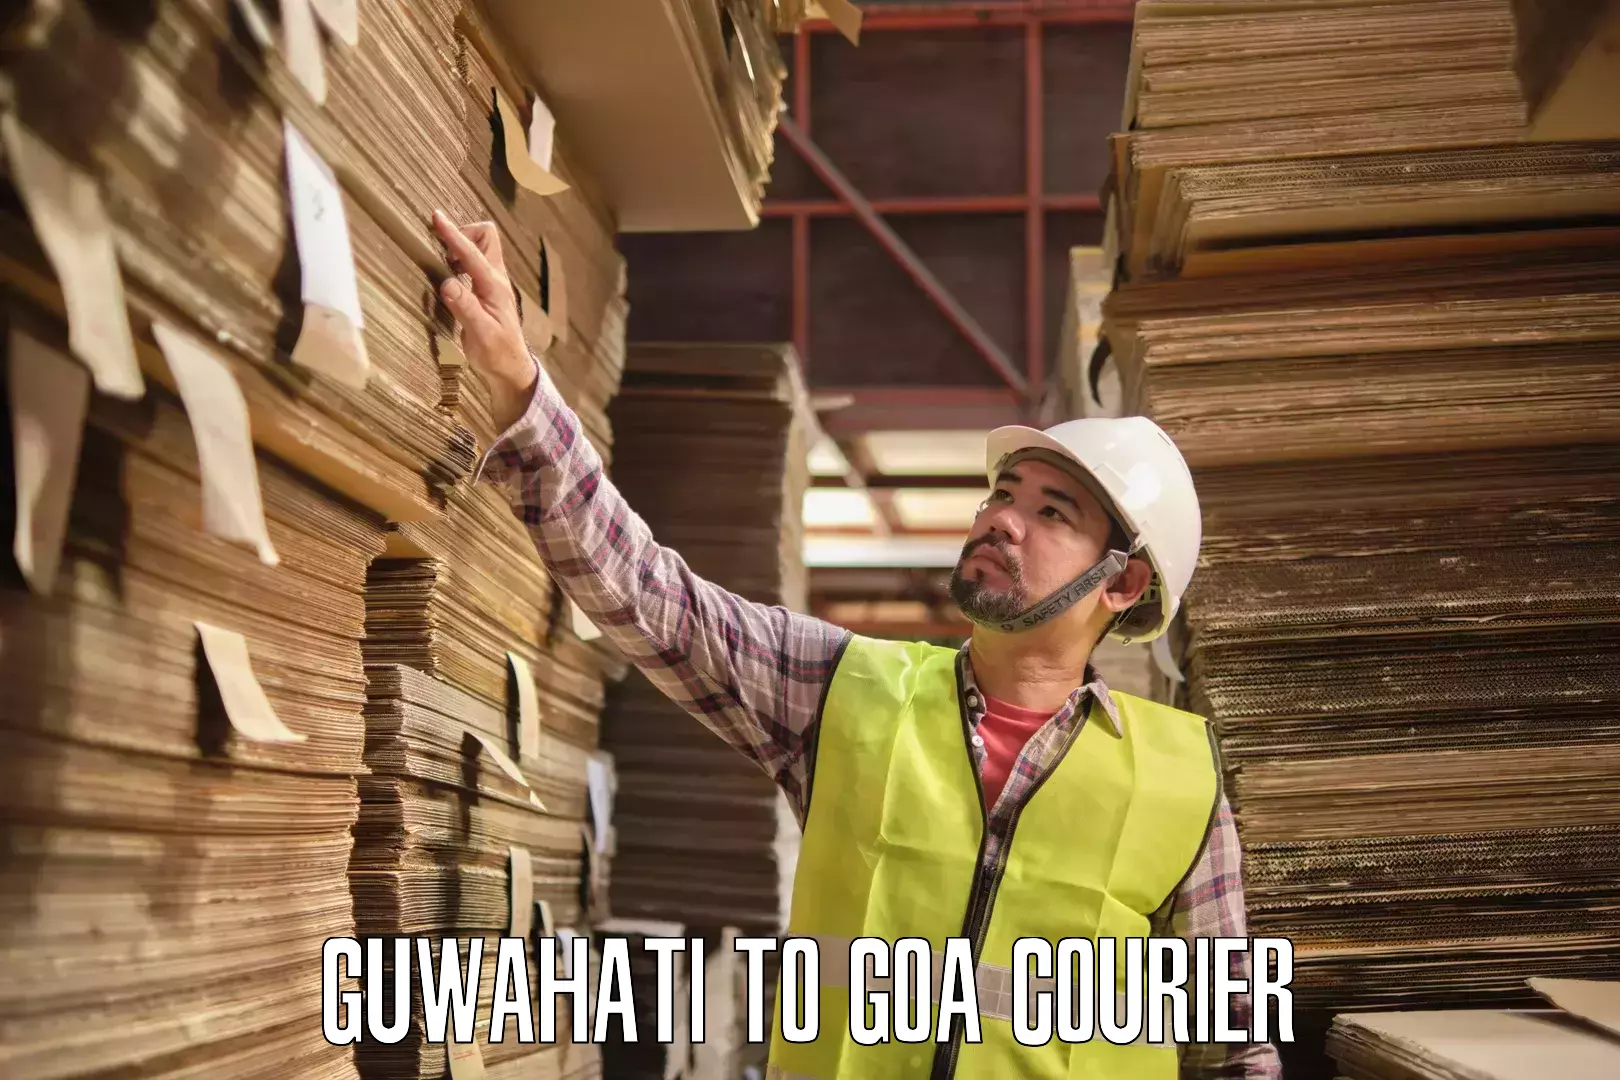 Courier service booking Guwahati to South Goa